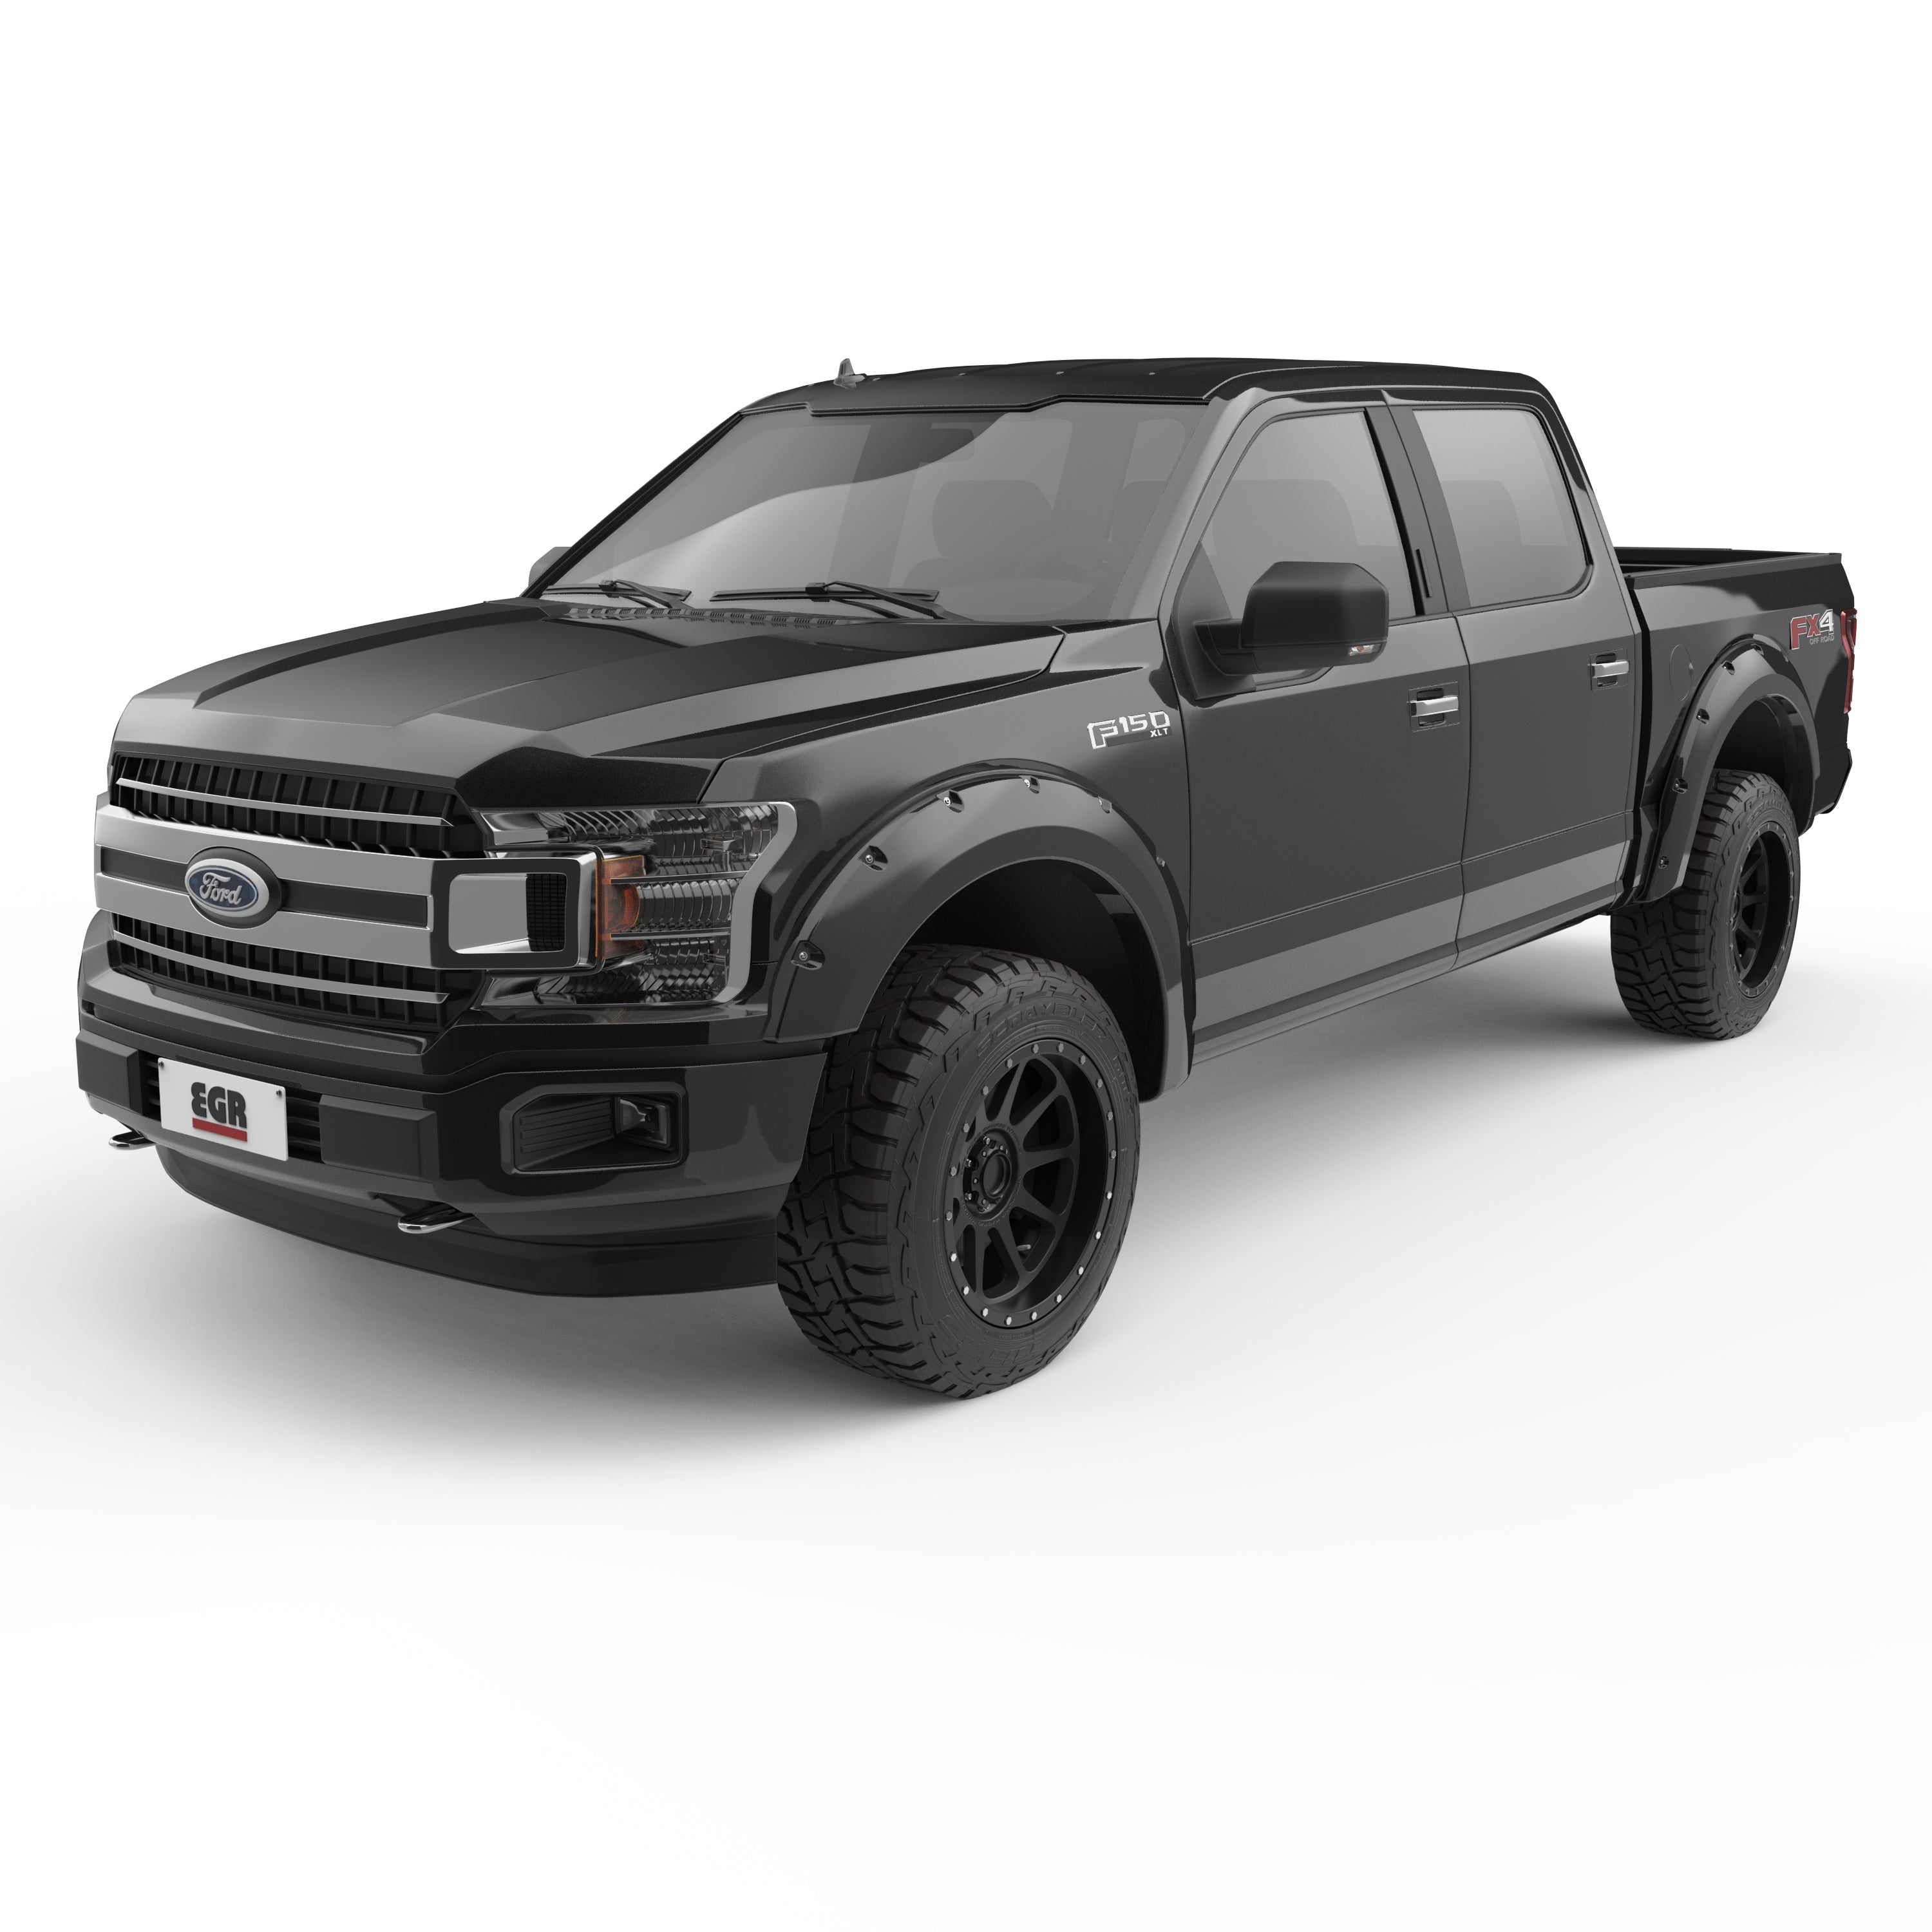 EGR 2018-2020 Ford F-150 Extended Crew Standard Cab Pickup 2Door 4Door Painted To Code Black Set Of 4 Non Raptor Traditional Bolt-On Look Fender Flares 793574-G1